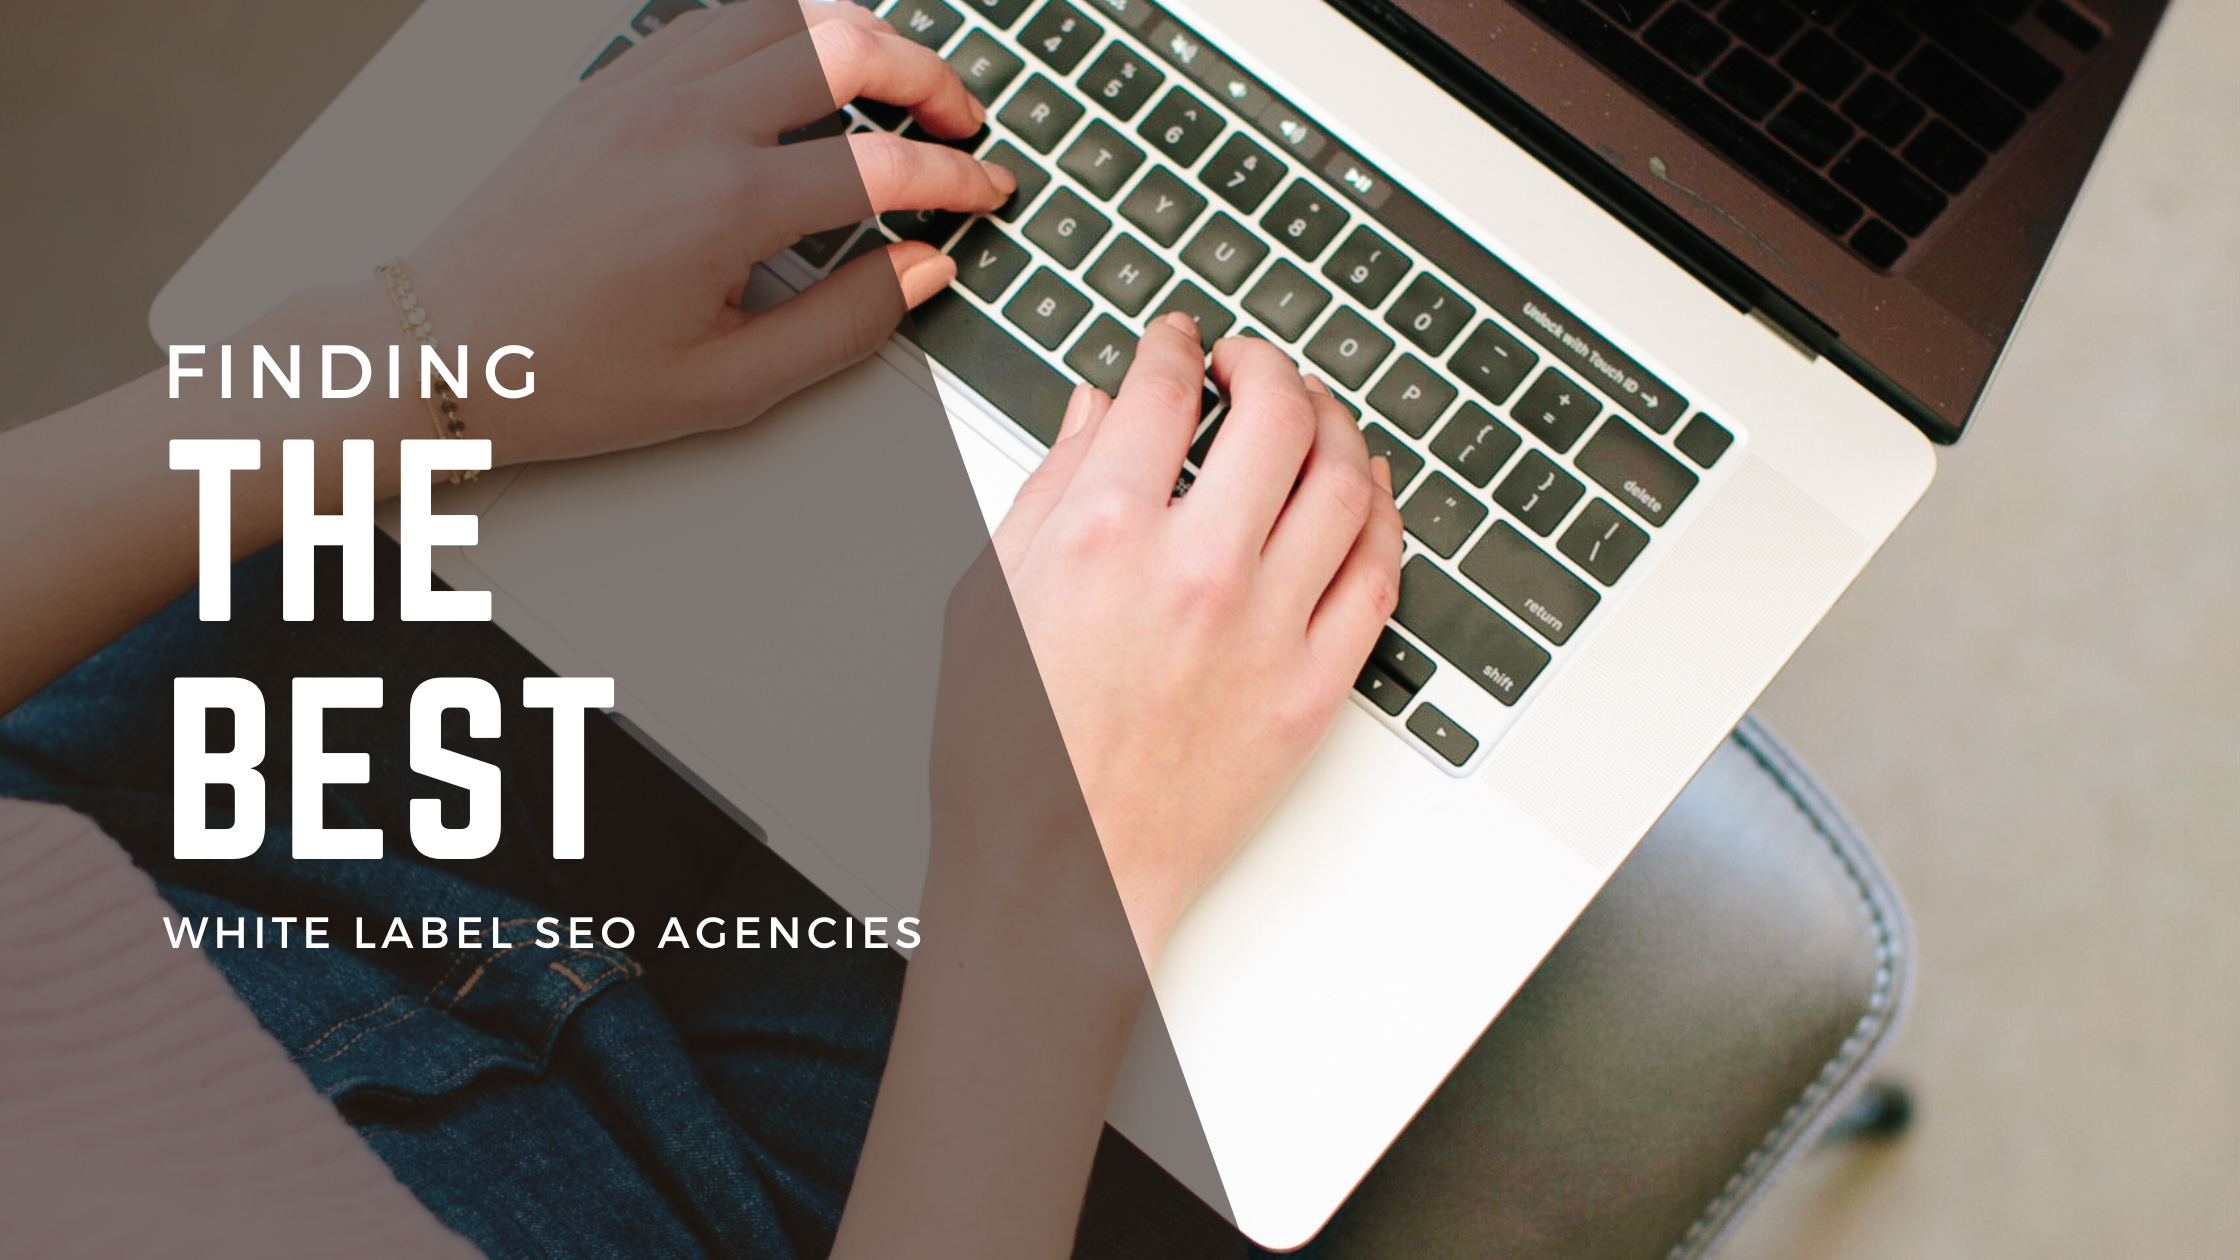 The best white label SEO company for you is the one that aligns with the services your clients need. Using your laptop to find the best white label SEO agencies.